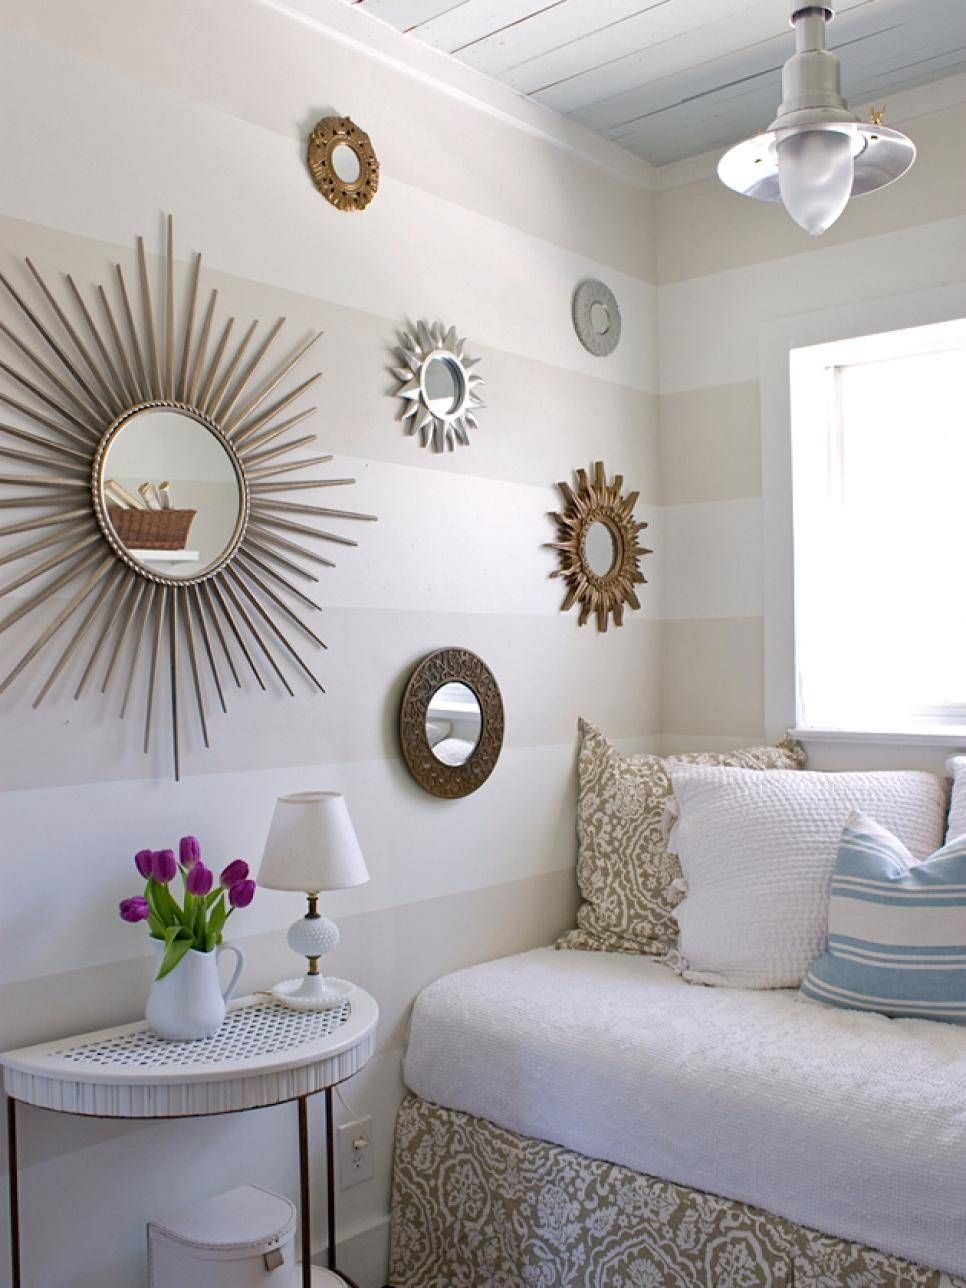 Bedroom Small Decorative Wall Mirrors : Small Decorative Wall Throughout Decorative Small Mirrors (View 20 of 25)